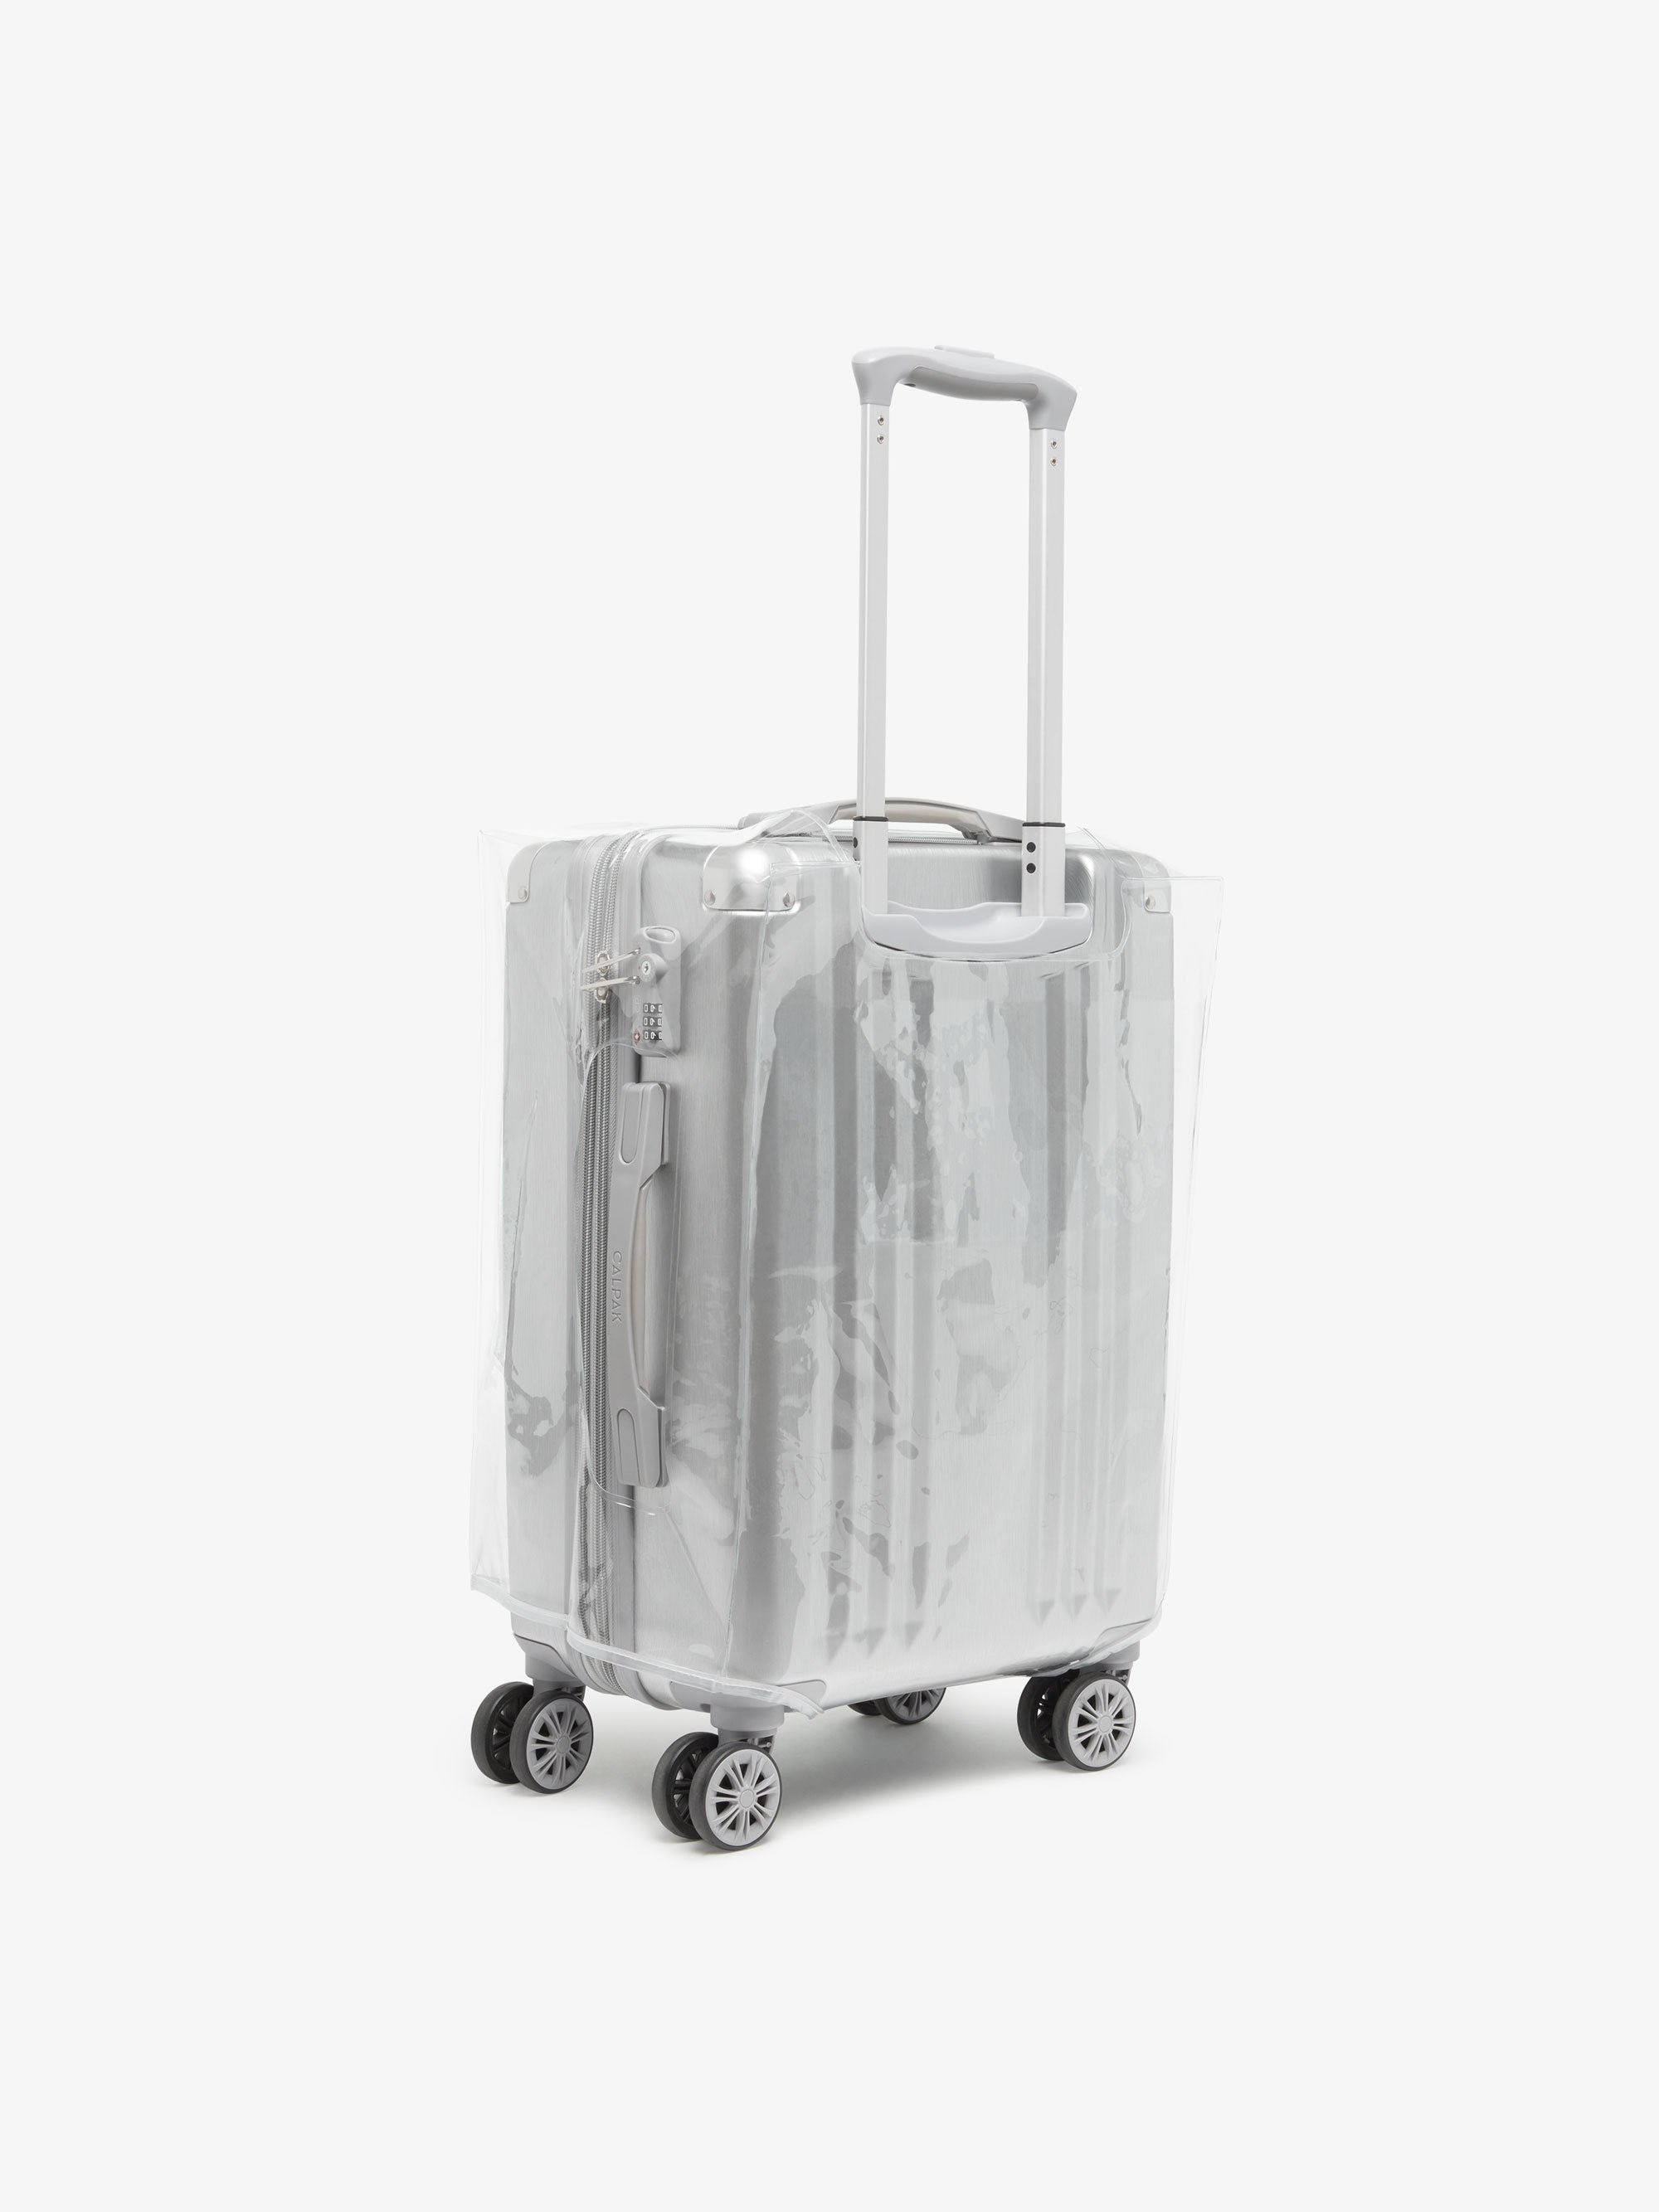 clear plastic luggage cover for carry on rolling suitcase